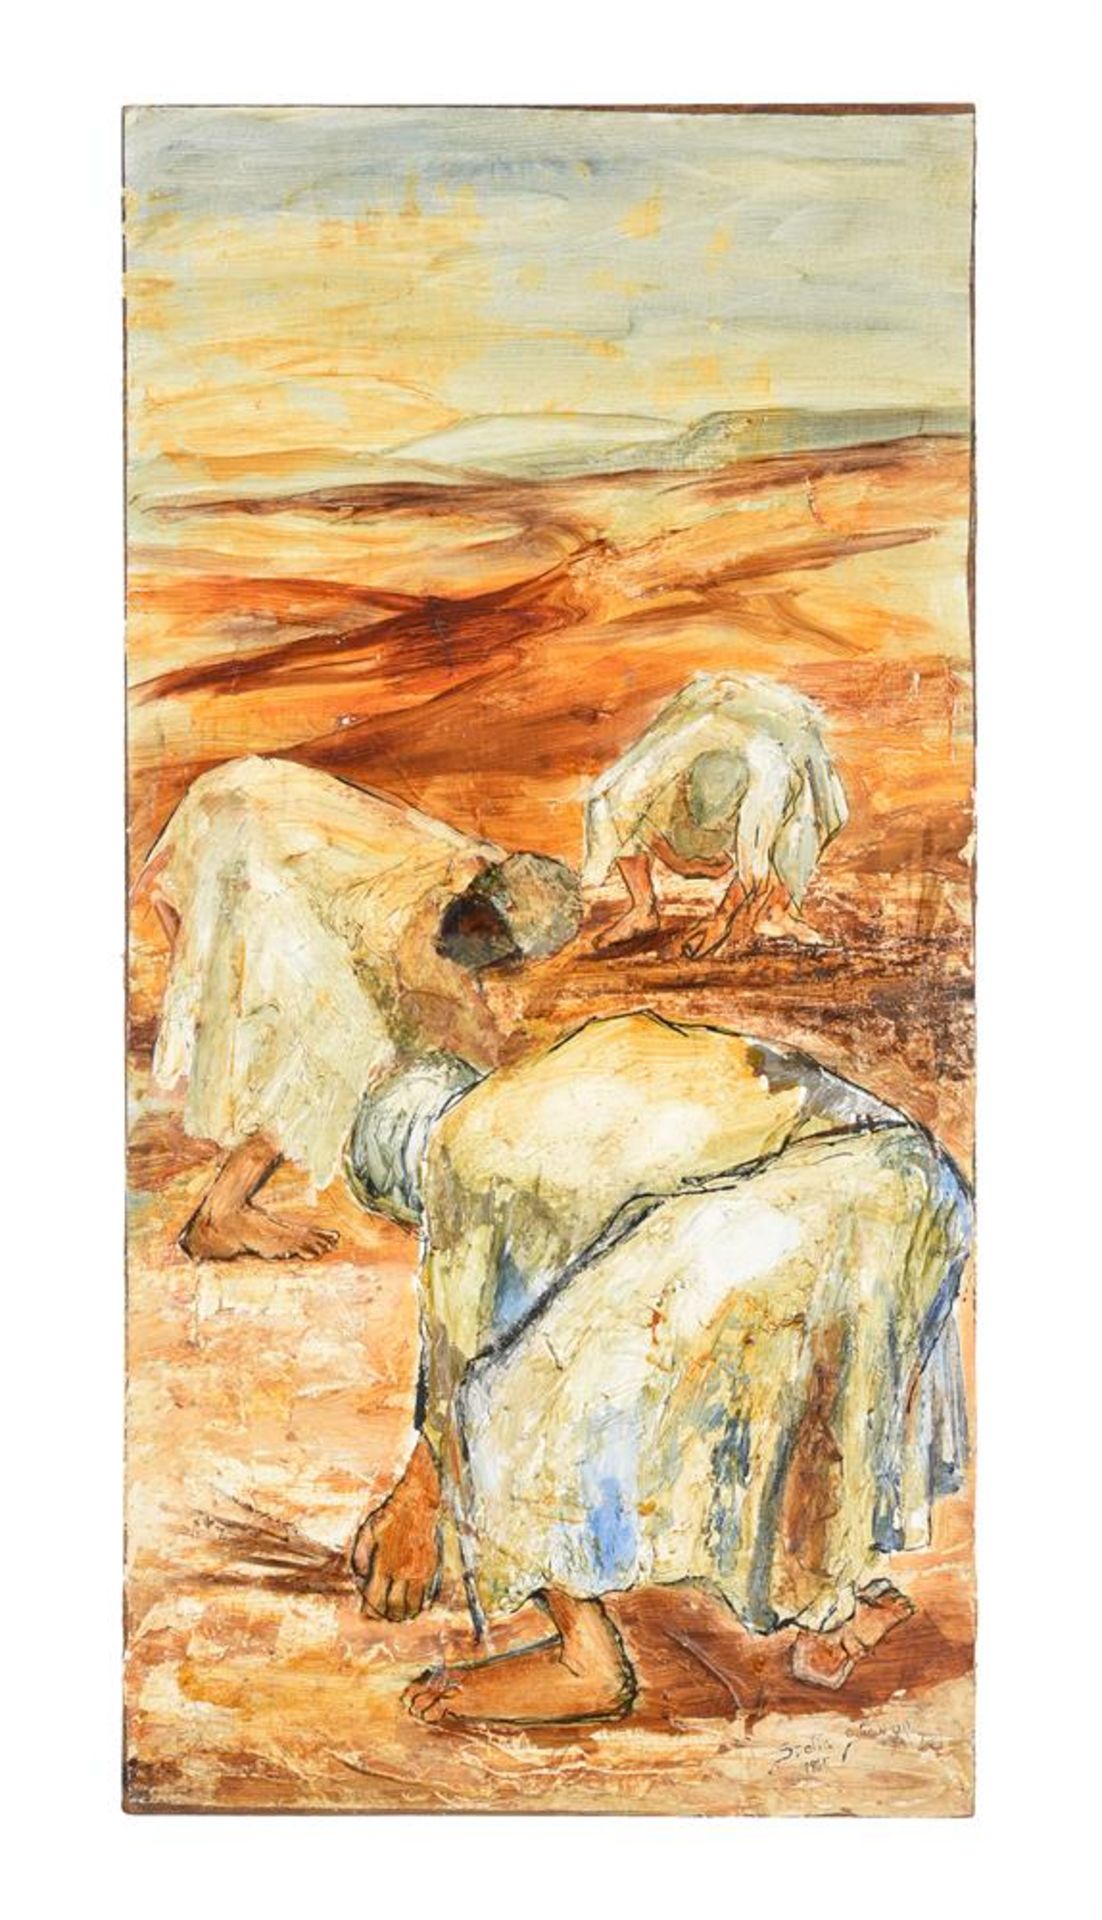 STELLA SHAWZIN (SOUTH AFRICAN 1920-2020), WORKERS IN THE FIELD